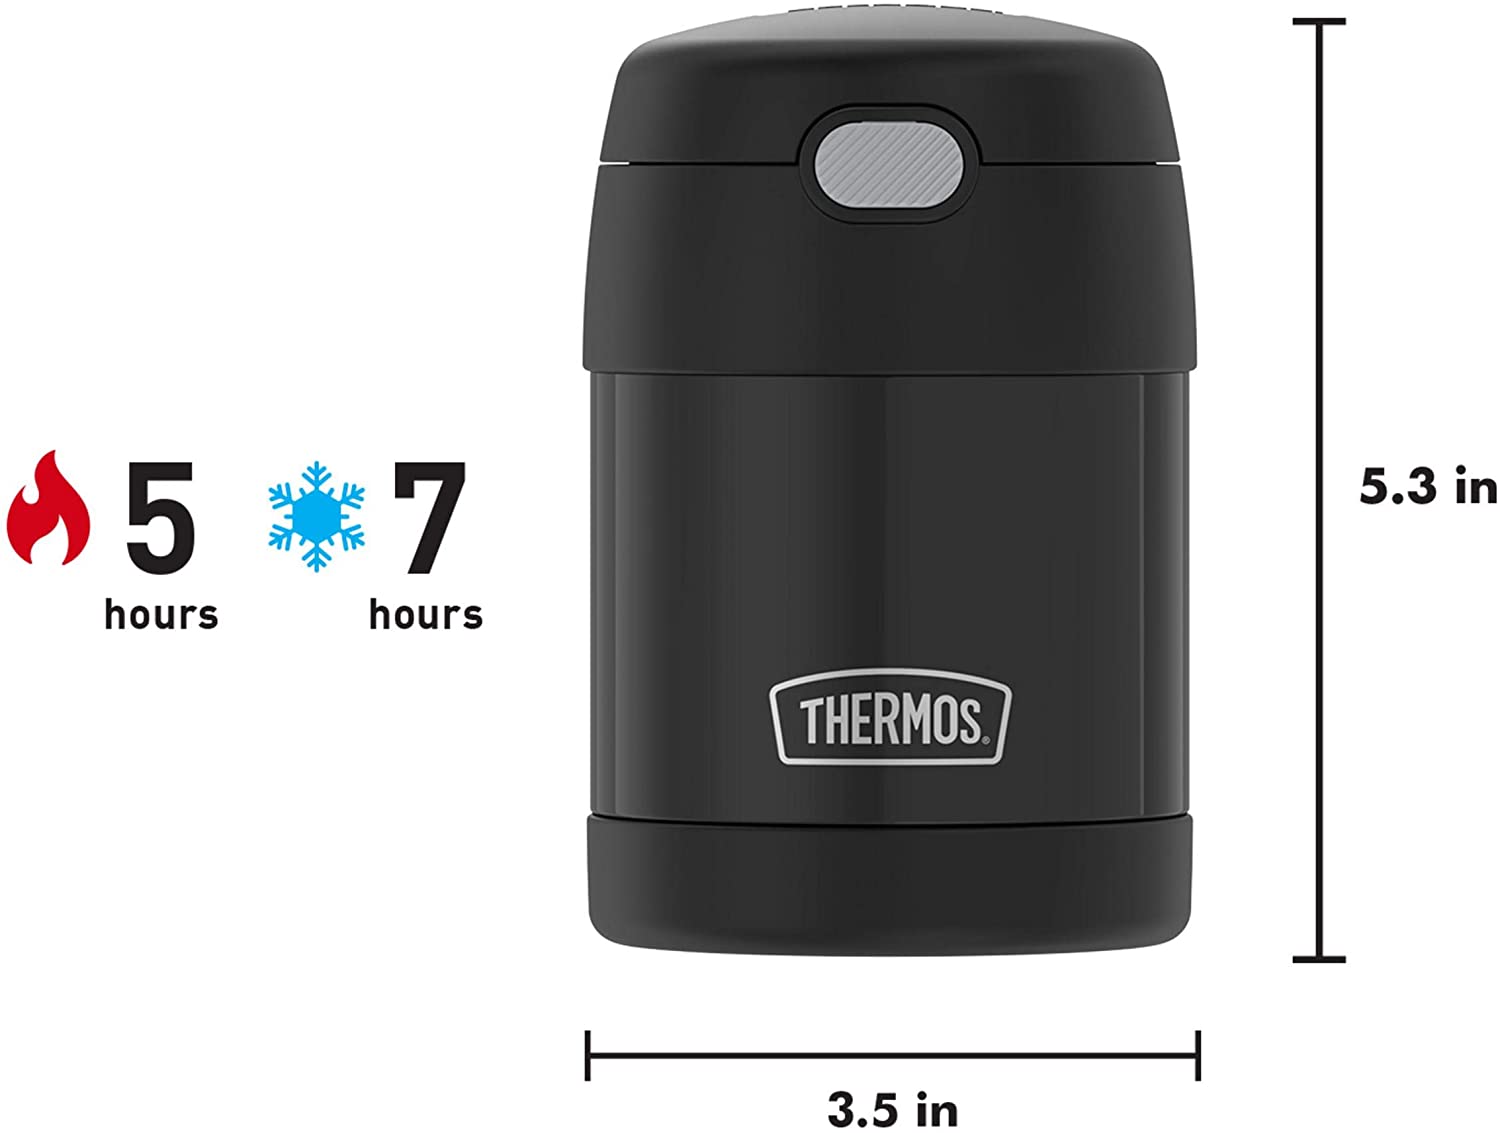 https://bigbigmart.com/wp-content/uploads/2021/11/THERMOS-FUNTAINER-10-Ounce-Stainless-Steel-Vacuum-Insulated-Kids-Food-Jar-with-Folding-Spoon-Black5.jpg